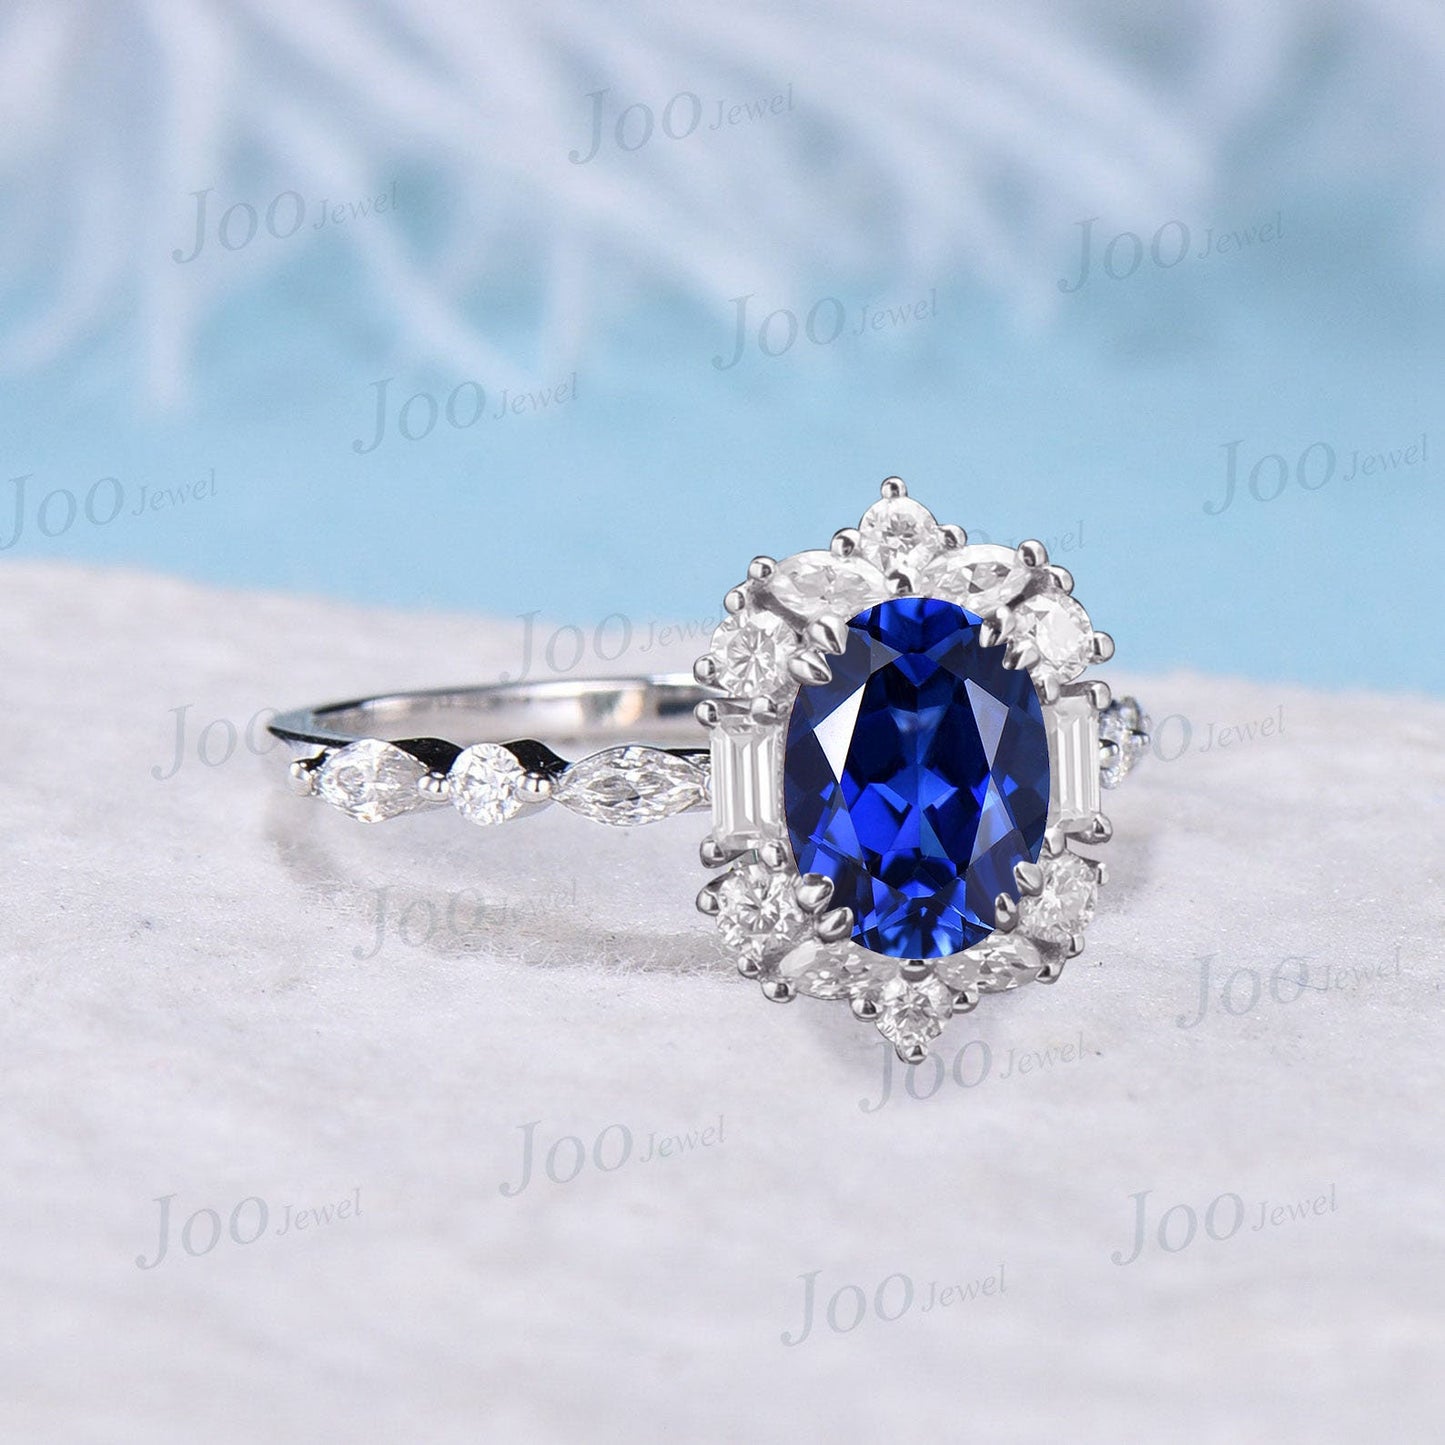 1.5ct Oval Blue Sapphire Ring 10K White Gold Halo Moissanite Blue Sapphire Engagement Ring Luxury Wedding Ring September Birthstone Gifts